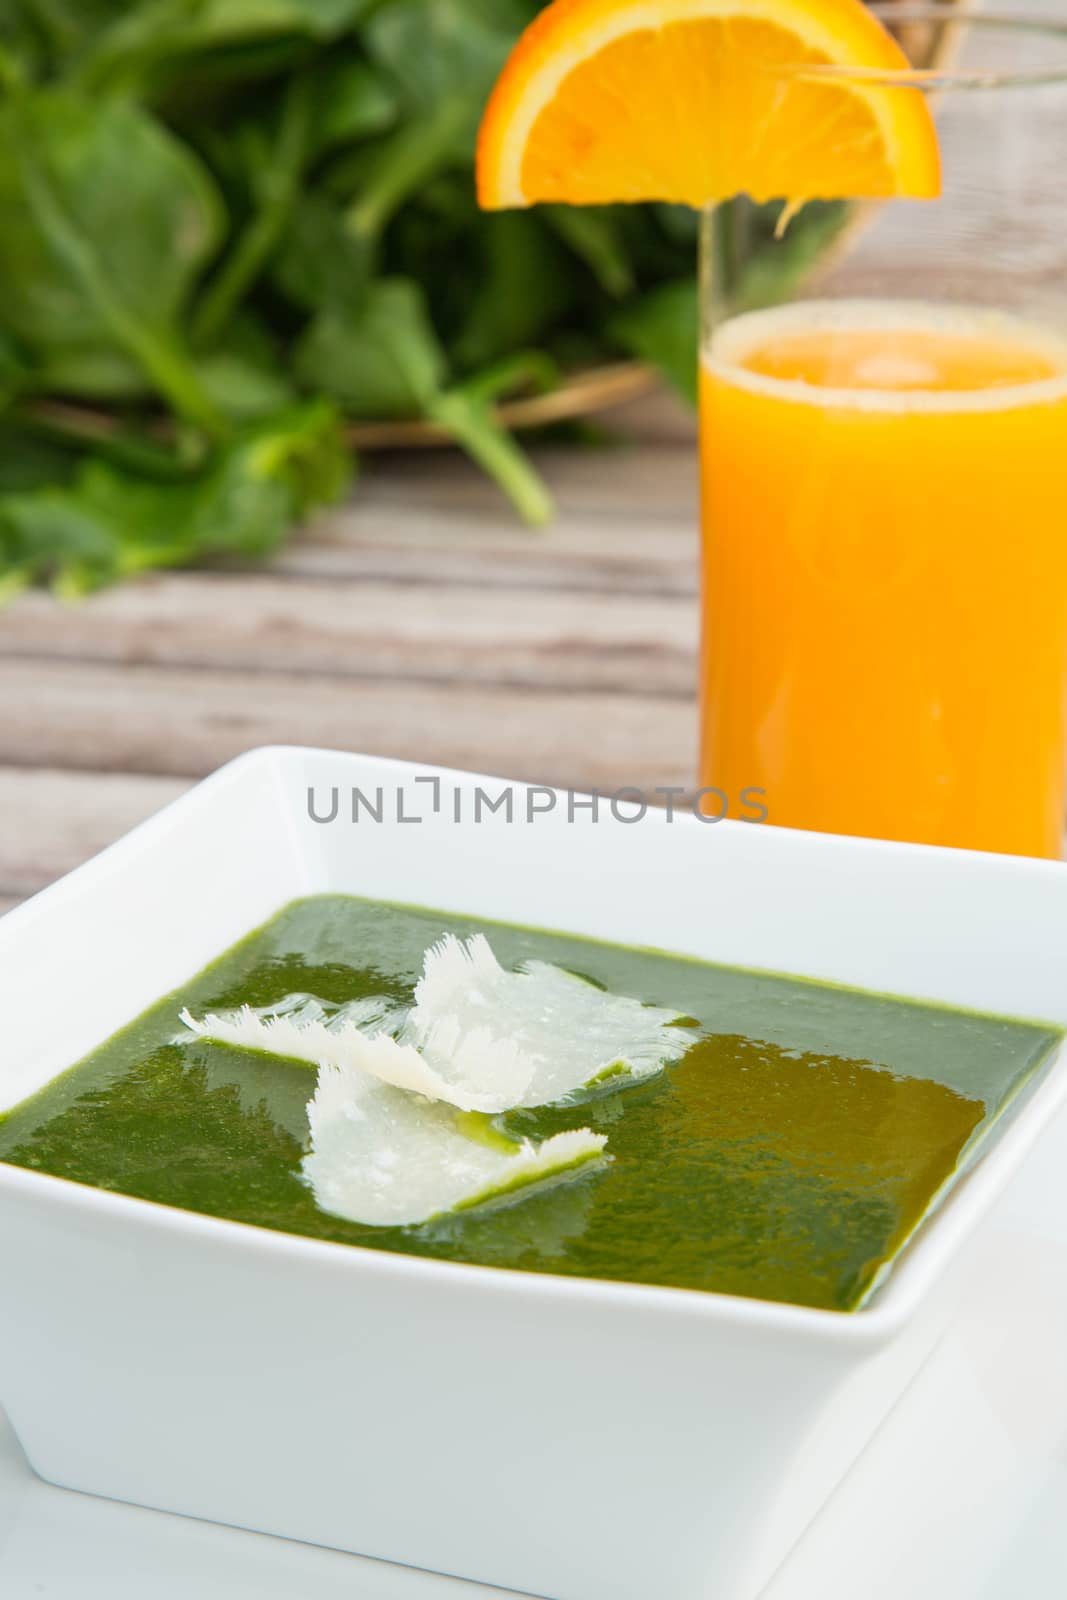 Spinach cream soup and a glass of fresh orange juice by tolikoff_photography